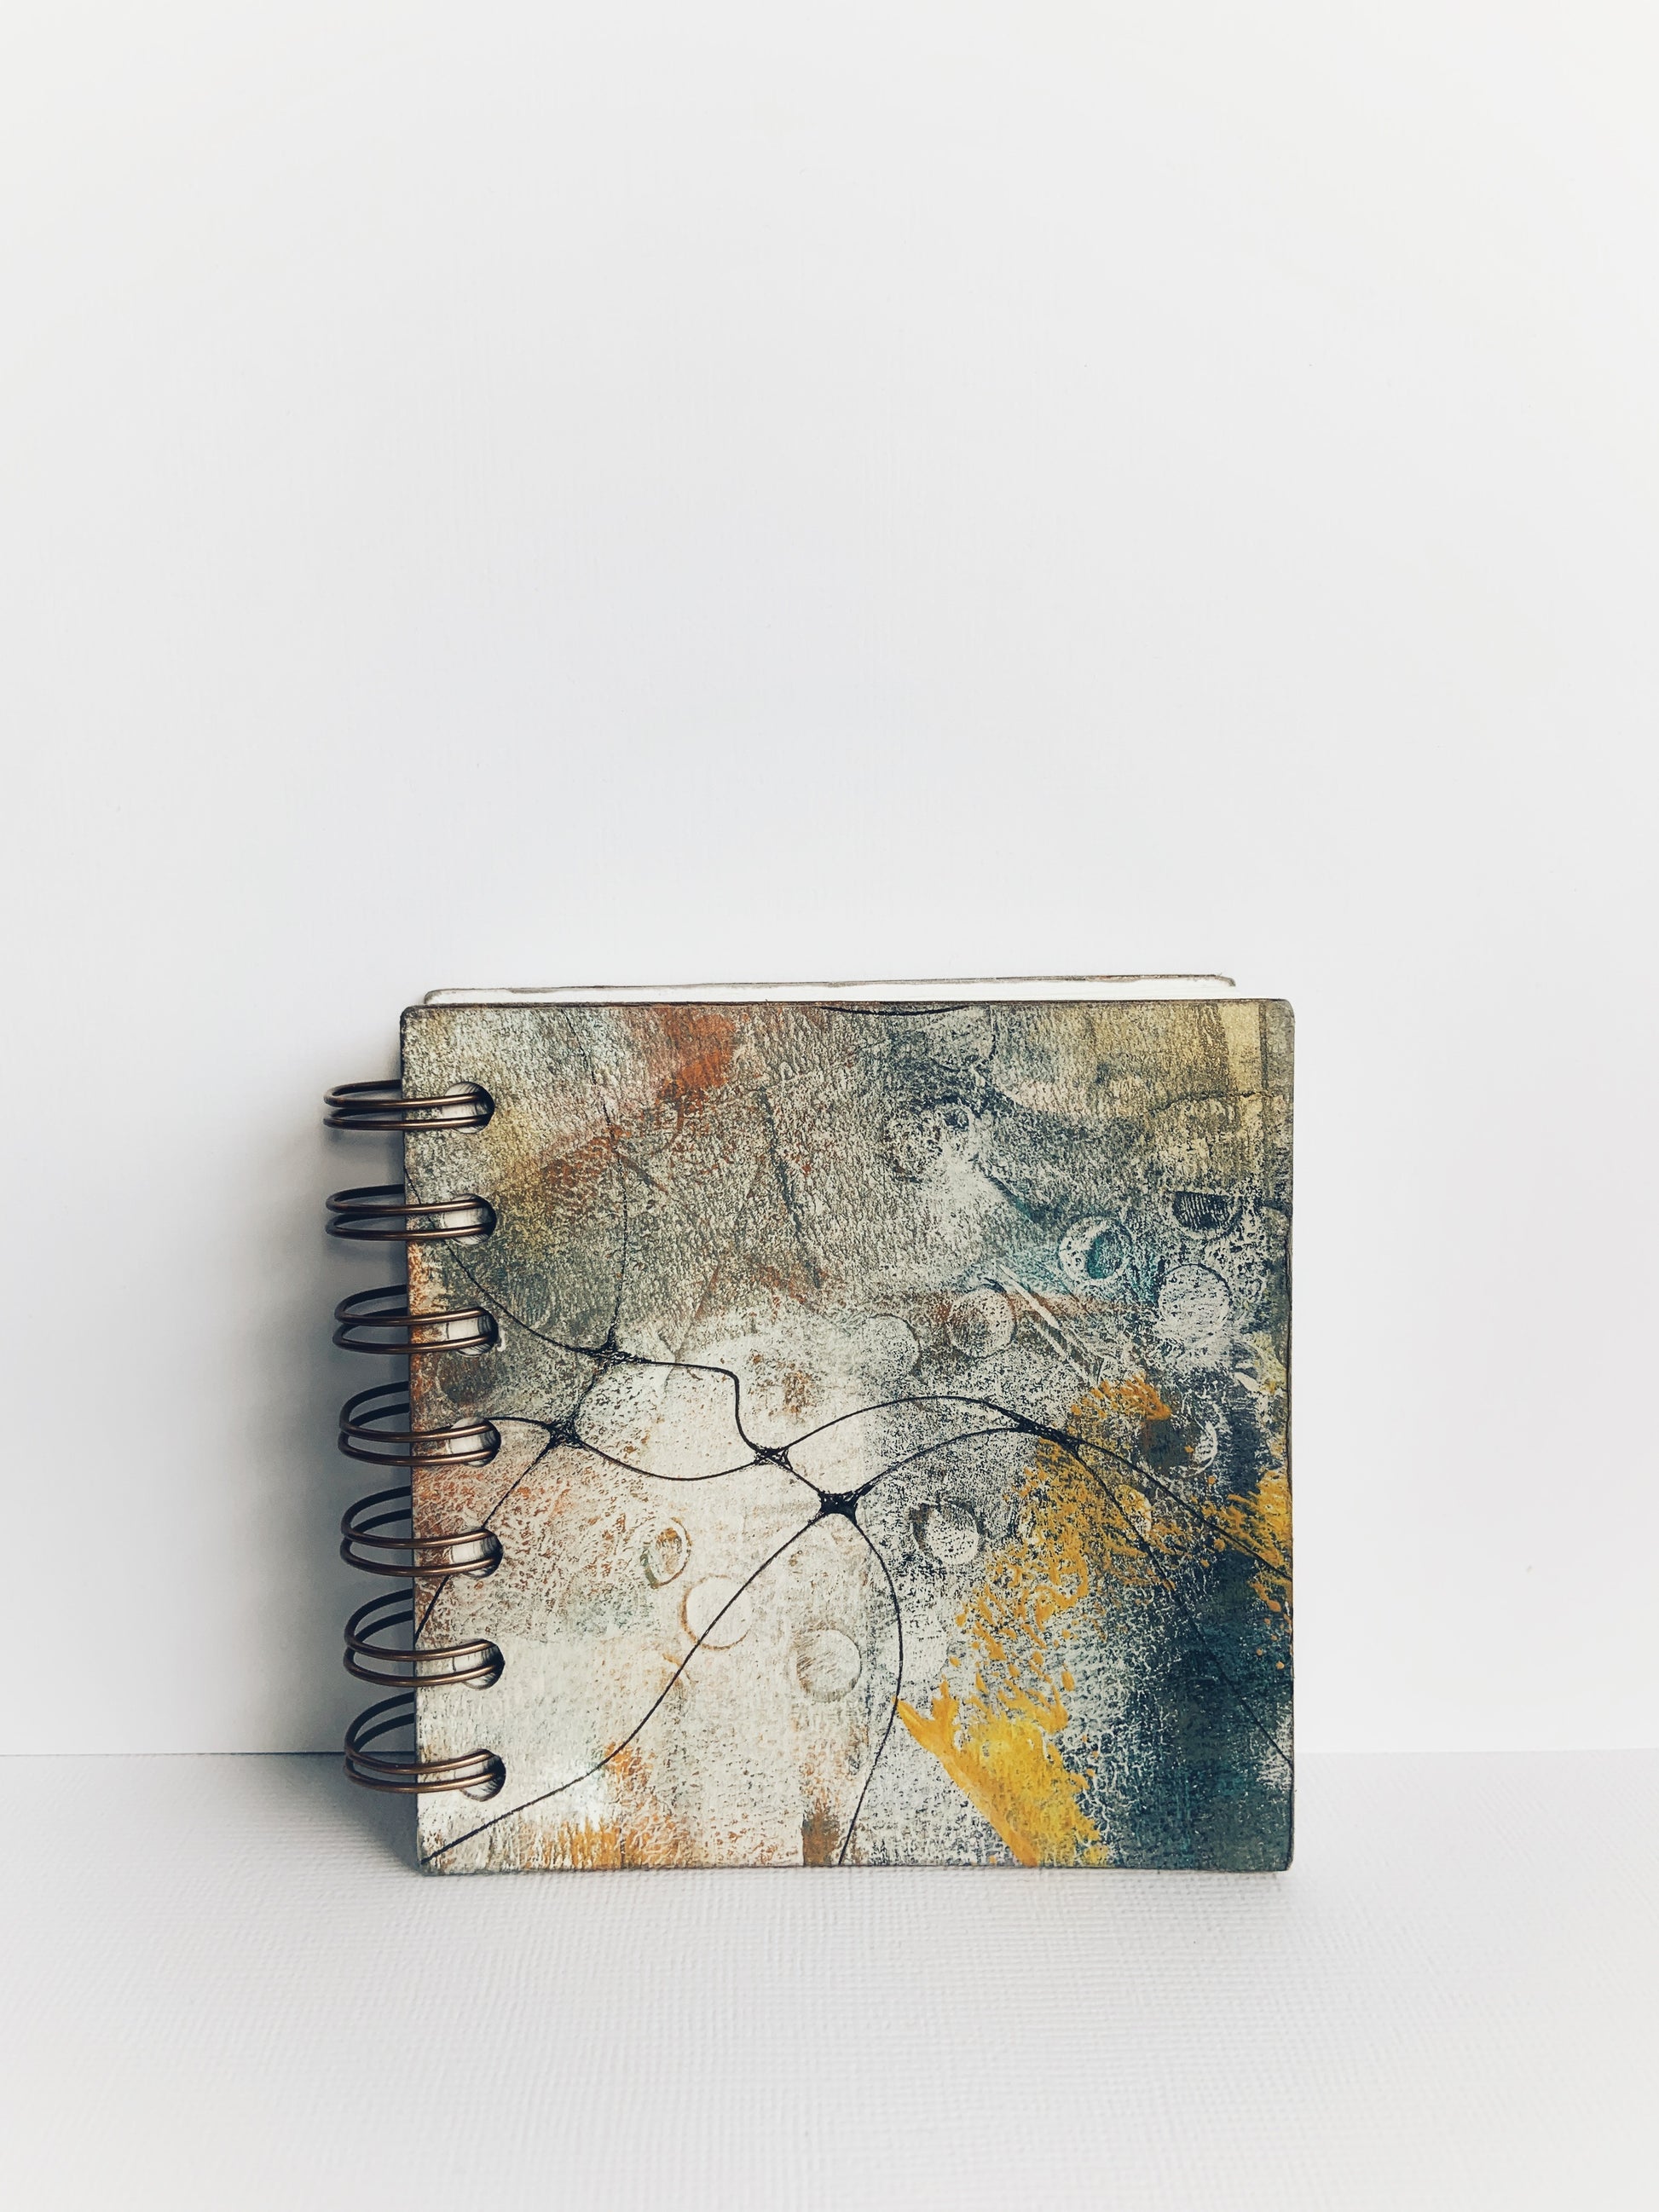 Handmade mini lined hardcover journal with painted front and back cover in grey, green and yellow tones with fine black neurographic lines